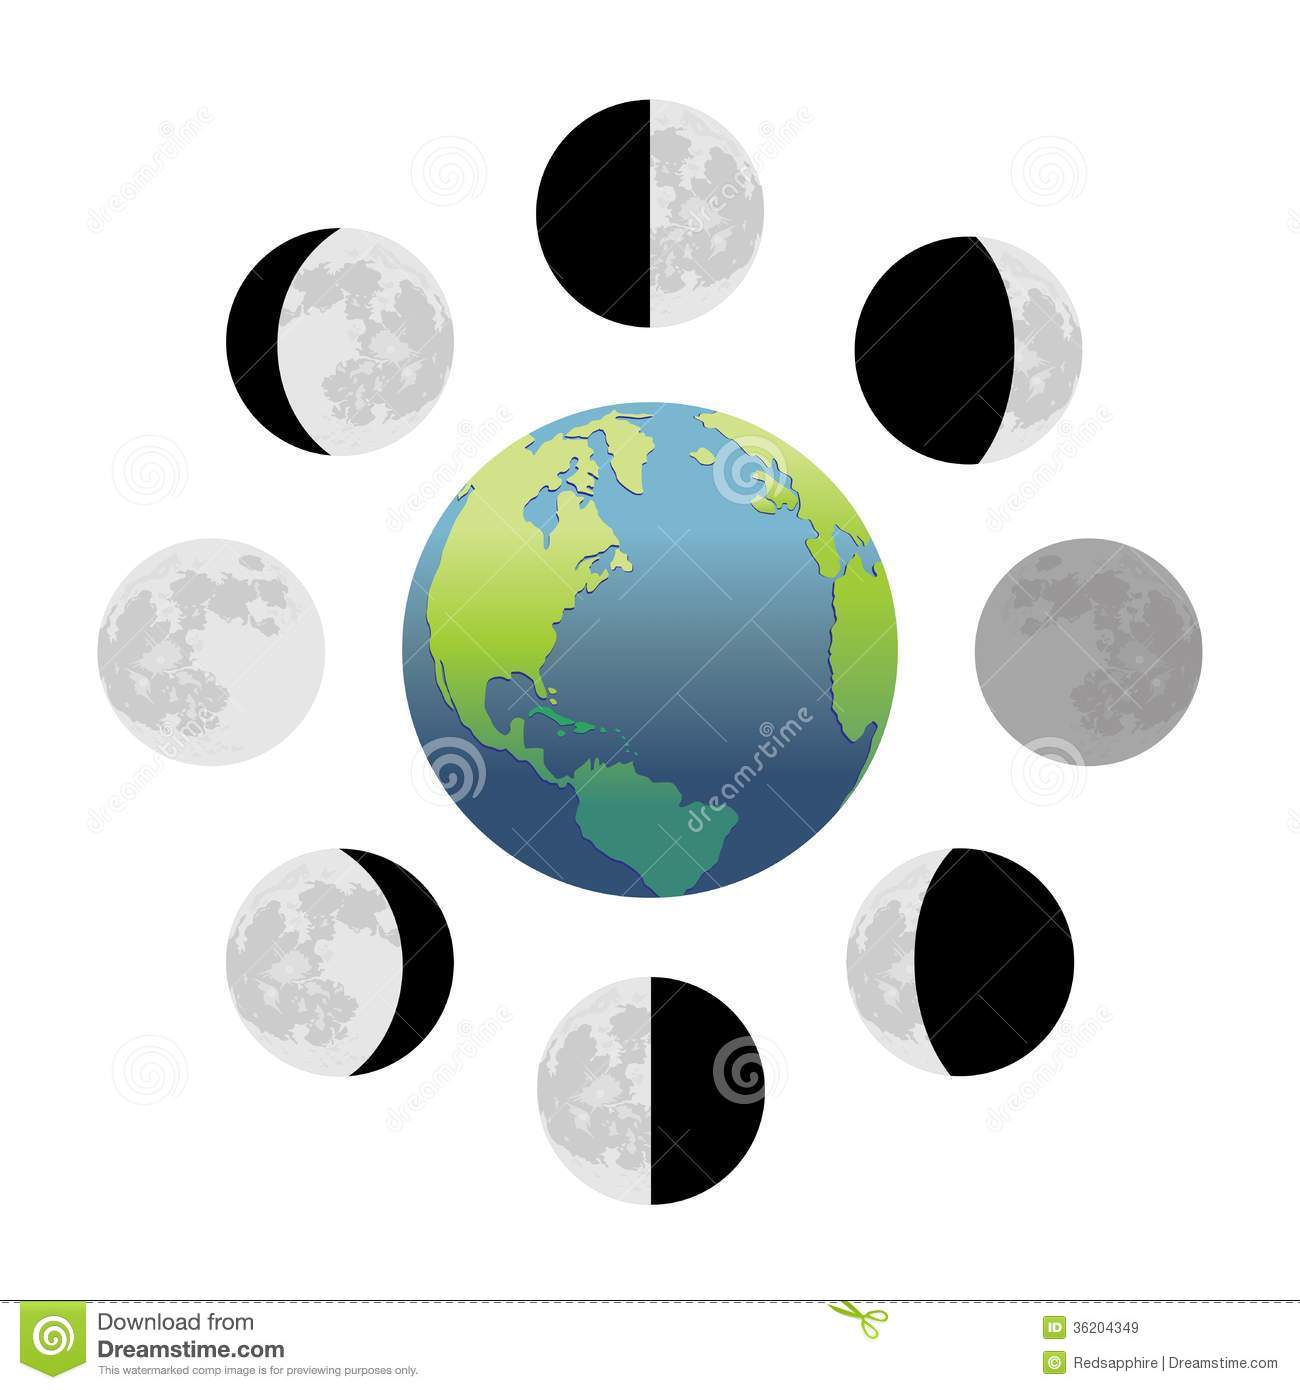 Moon Phases Royalty Free Stock Images   Image  36204349